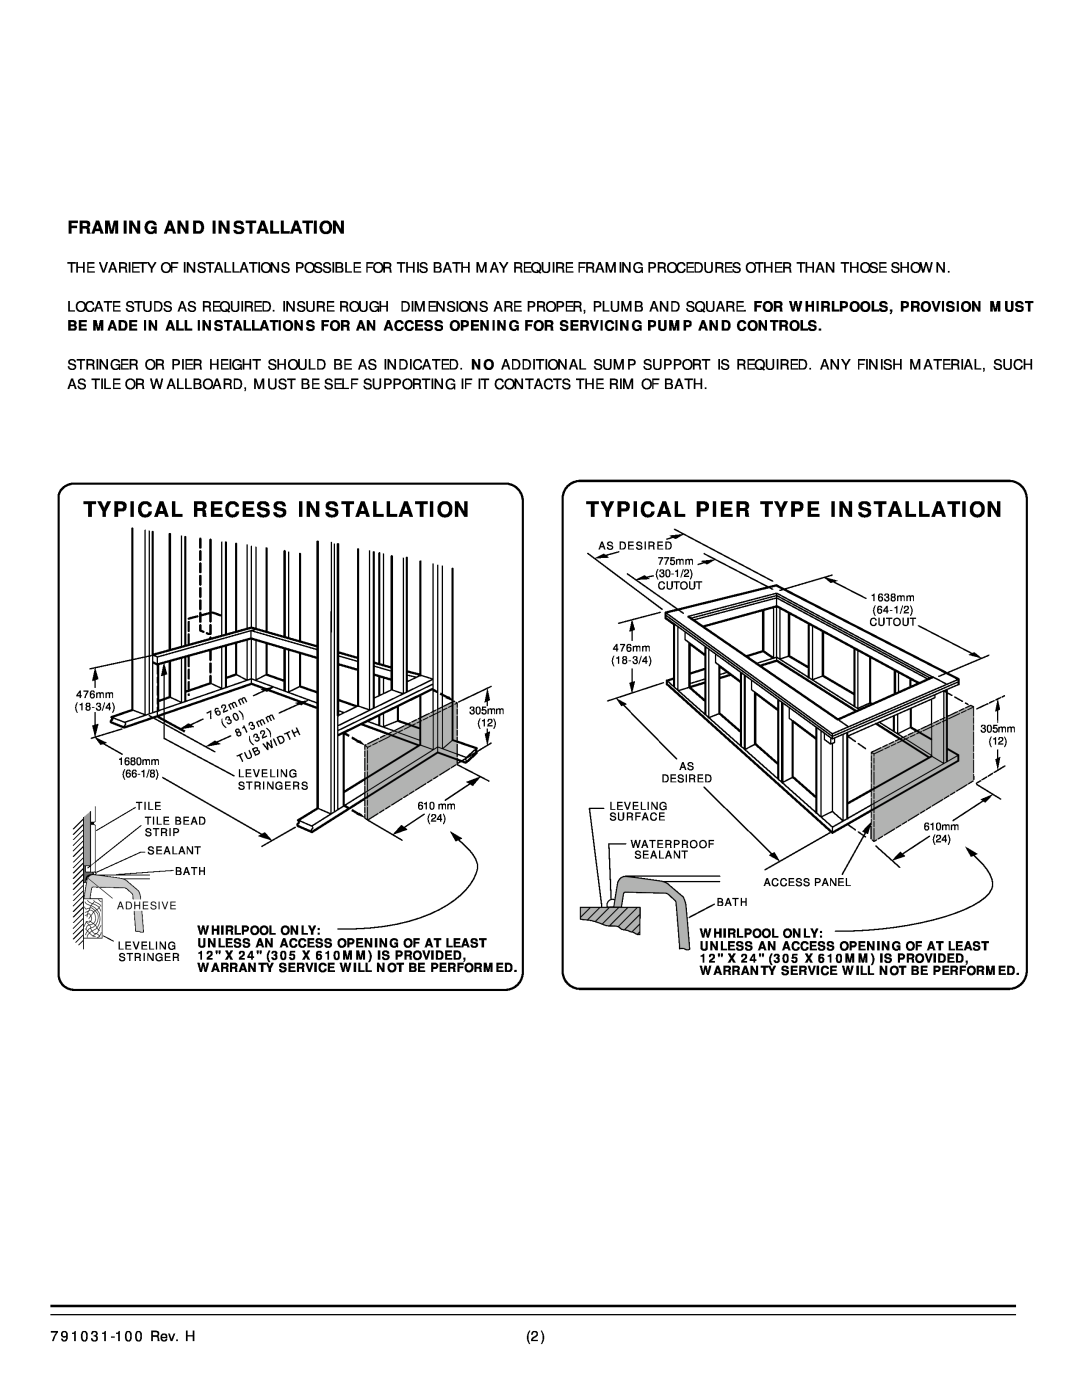 American Standard 2470.XXXW Typical Recess Installation, Typical Pier Type Installation, Framing And Installation 